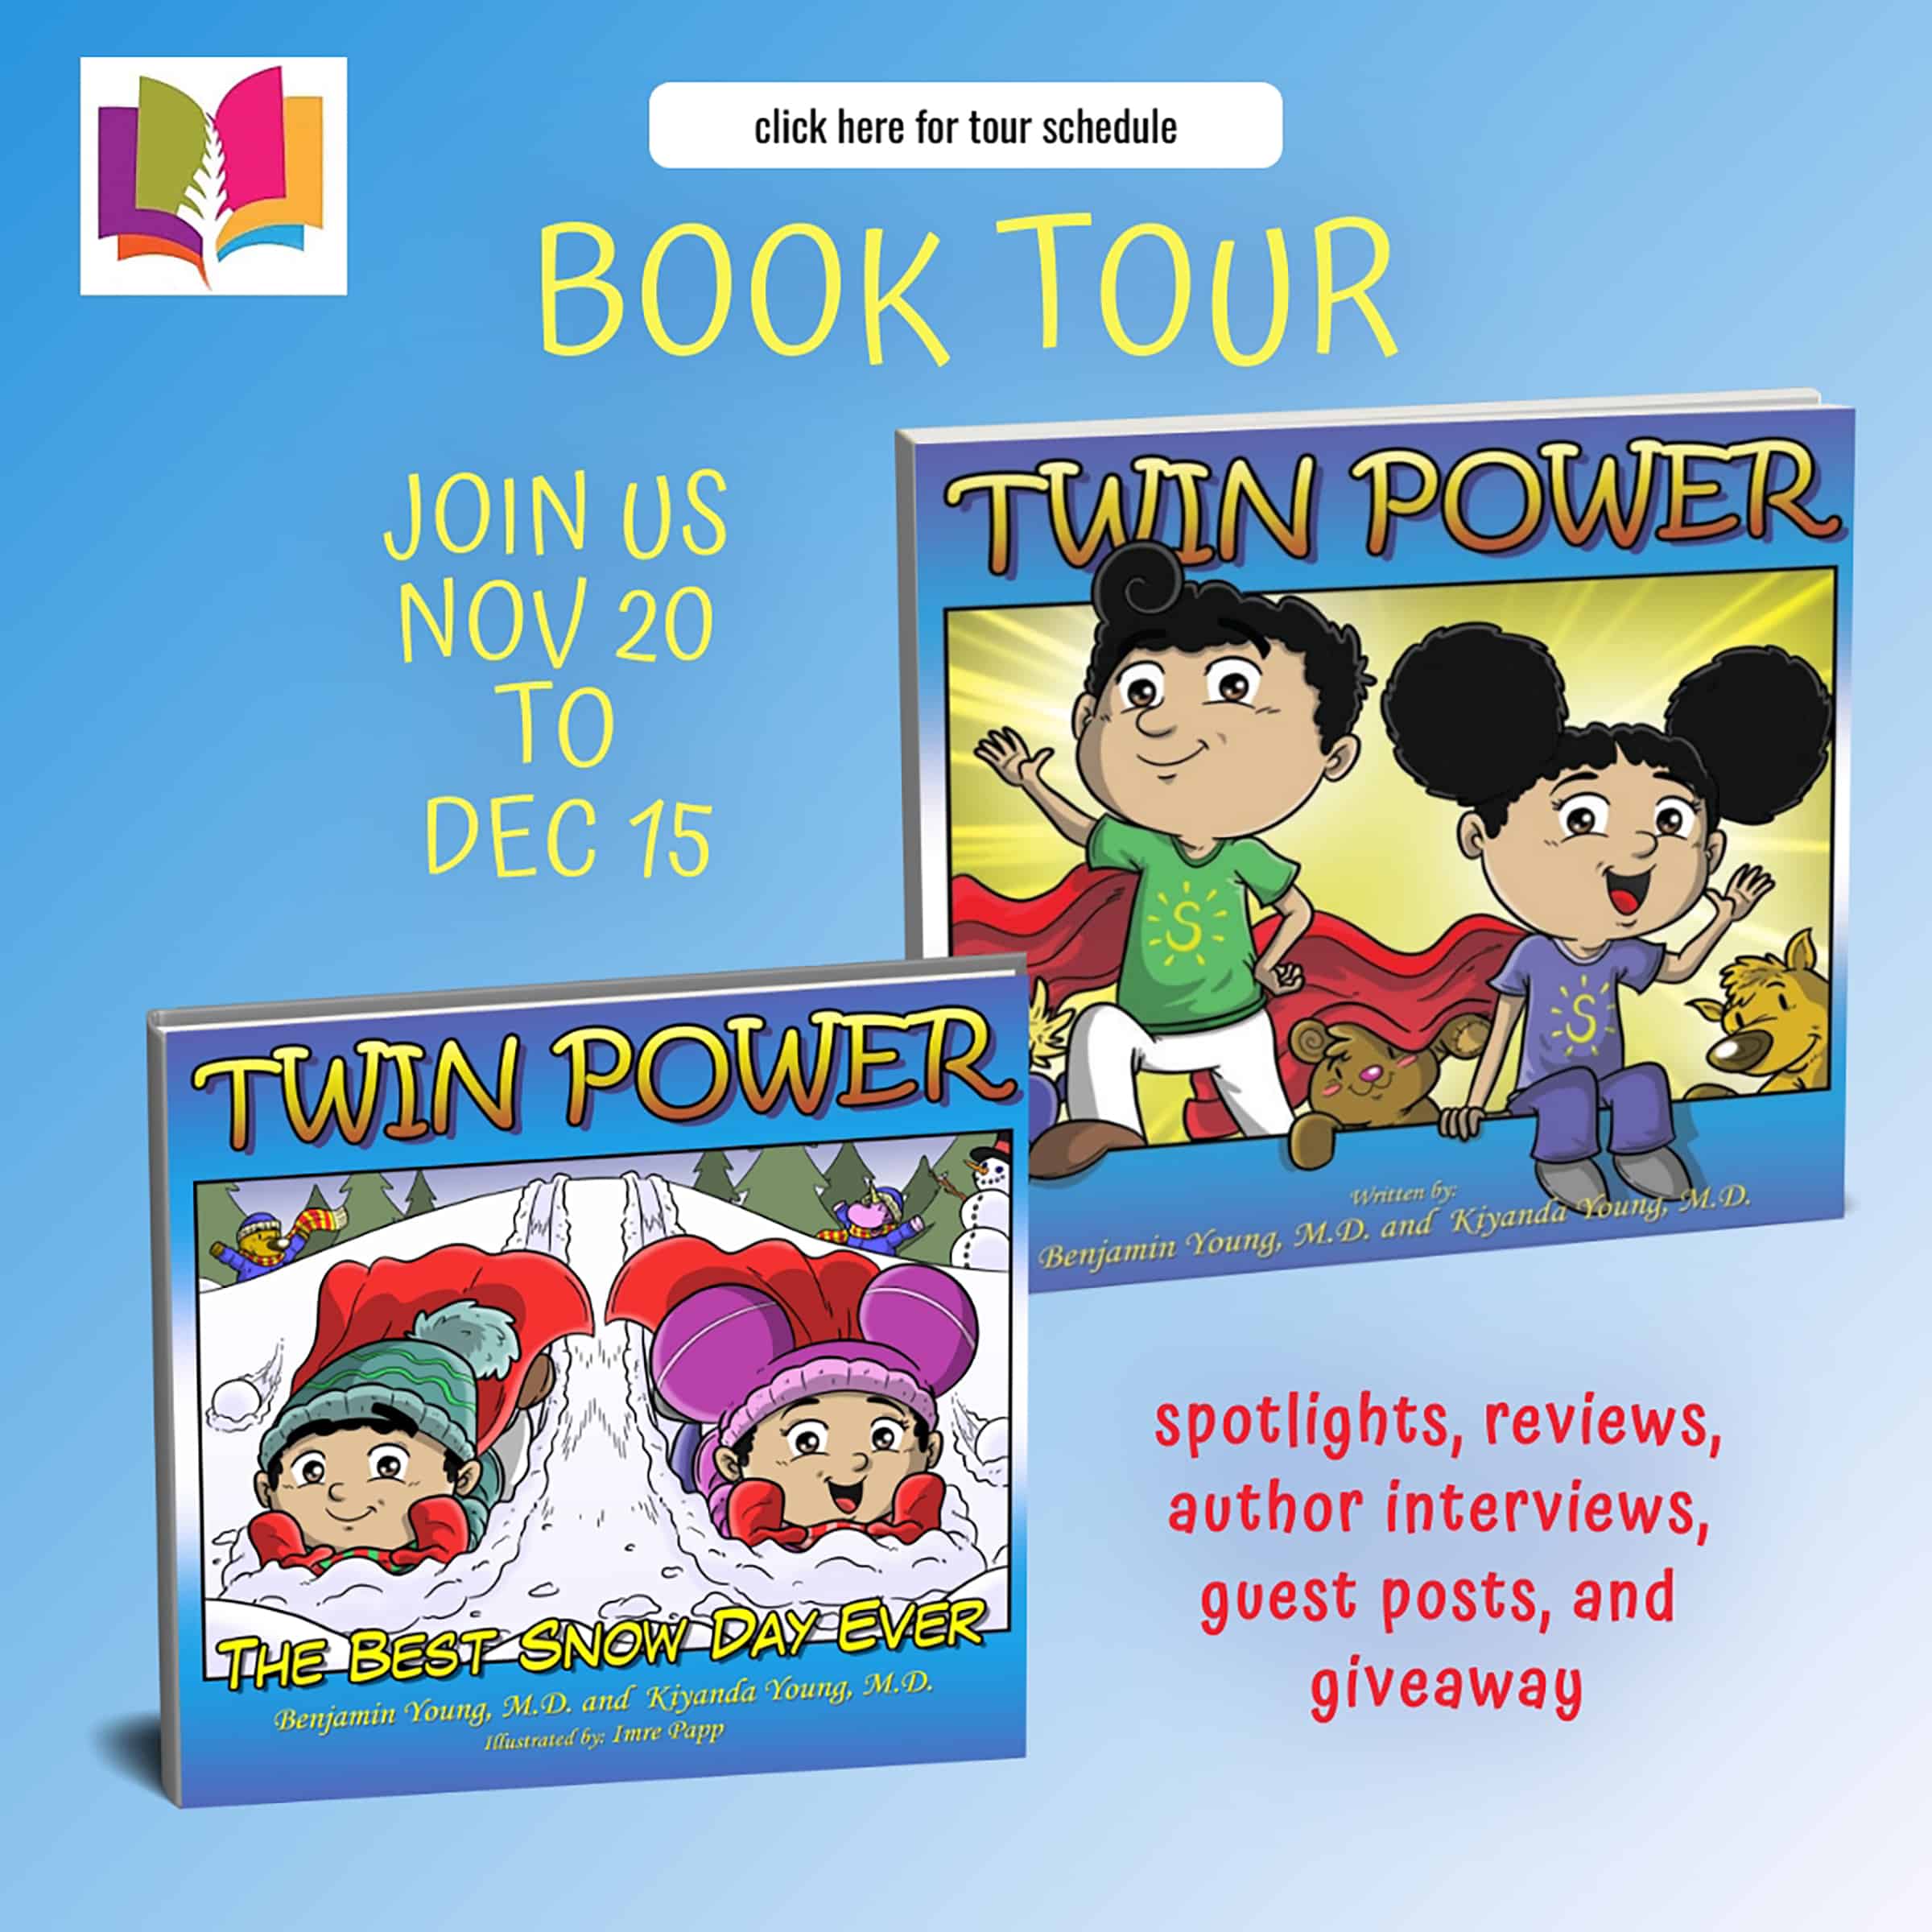 Twin Power: Our Bond is Our Greatest Strength (The Twin Power series #1) by Ben and Kiyanda Young | Children's Book Review ~ Guest Post ~ Giveaway | #Twins @BeesTwizzler @iReadBookTours 